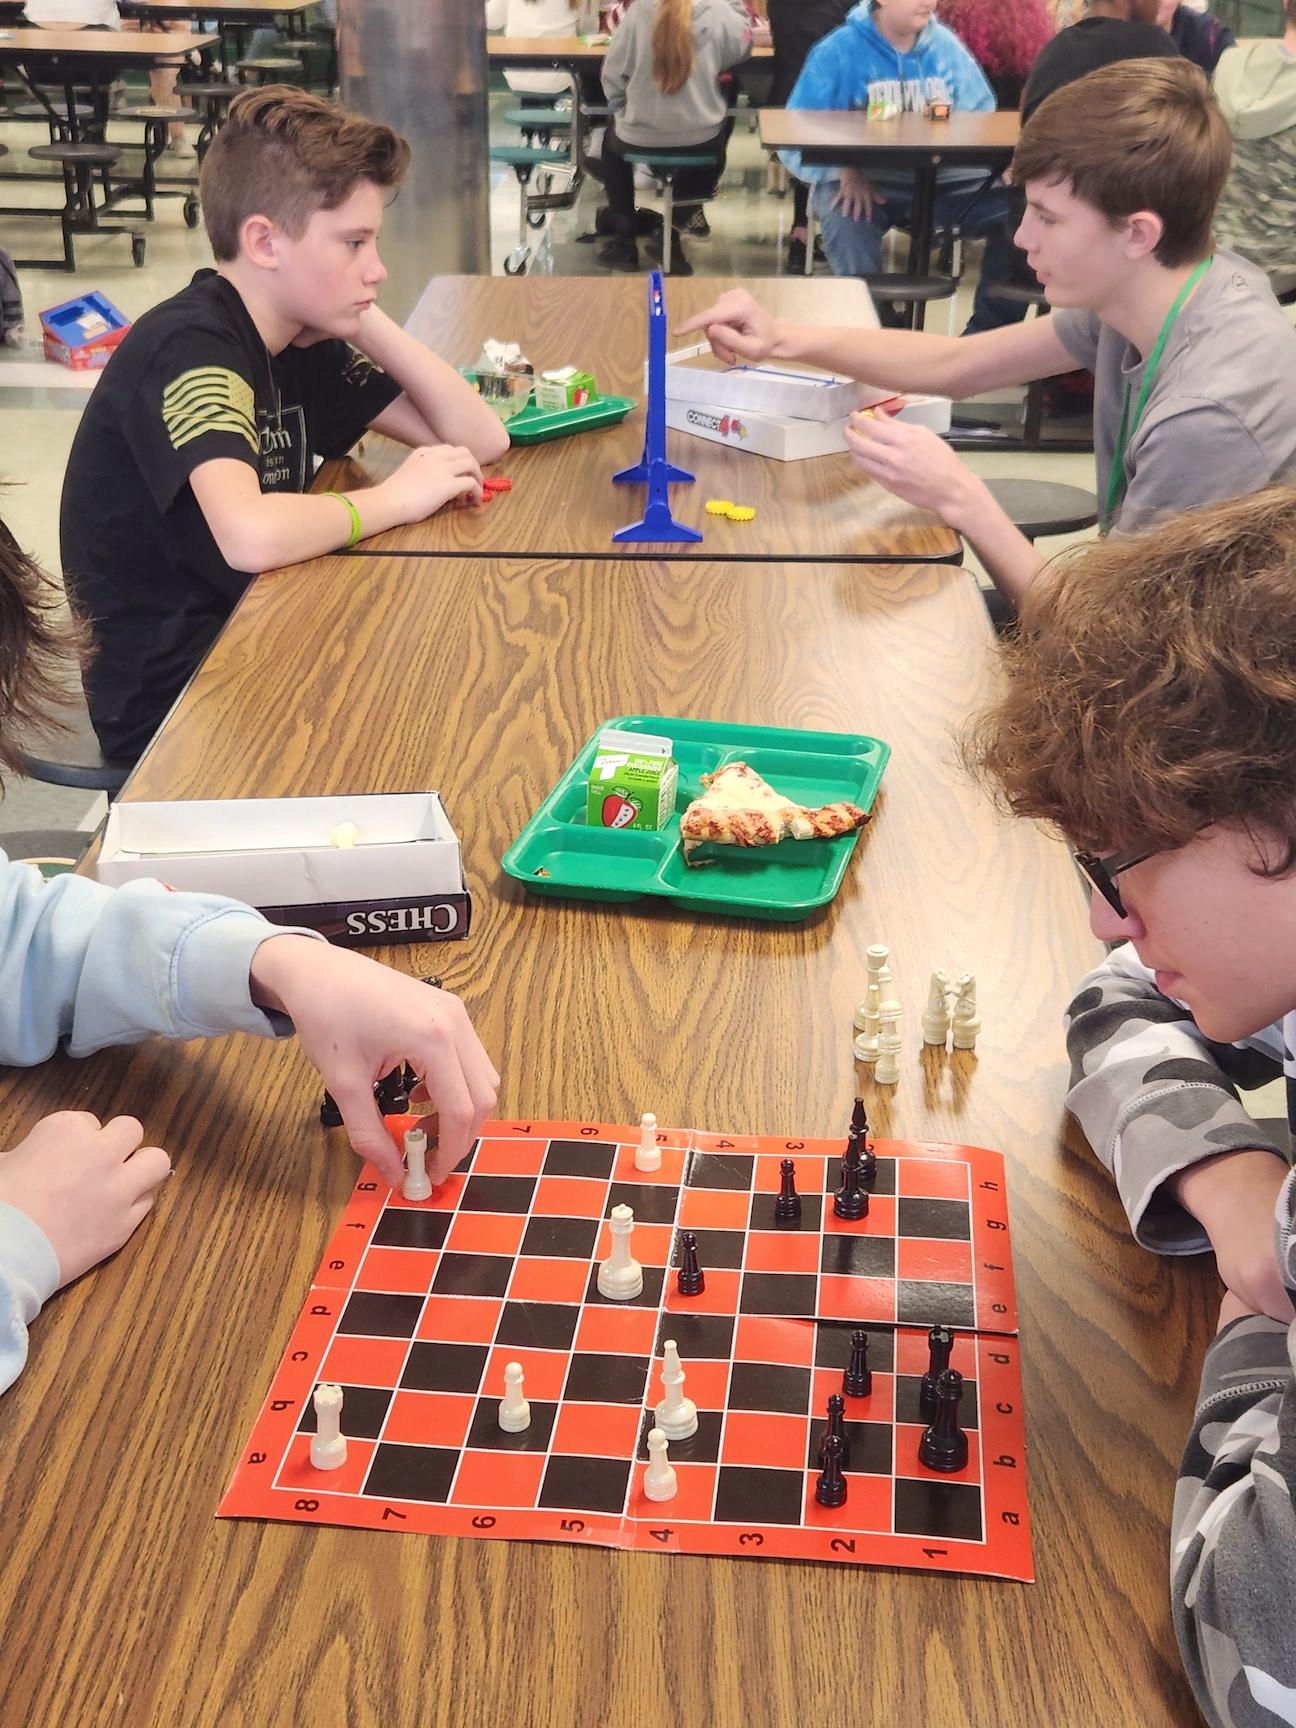 Brayden Tirpak and Noak Haslam compete at checkers, and in the background, Nino Sunseri and Grant Alexander enjoy Connect 4